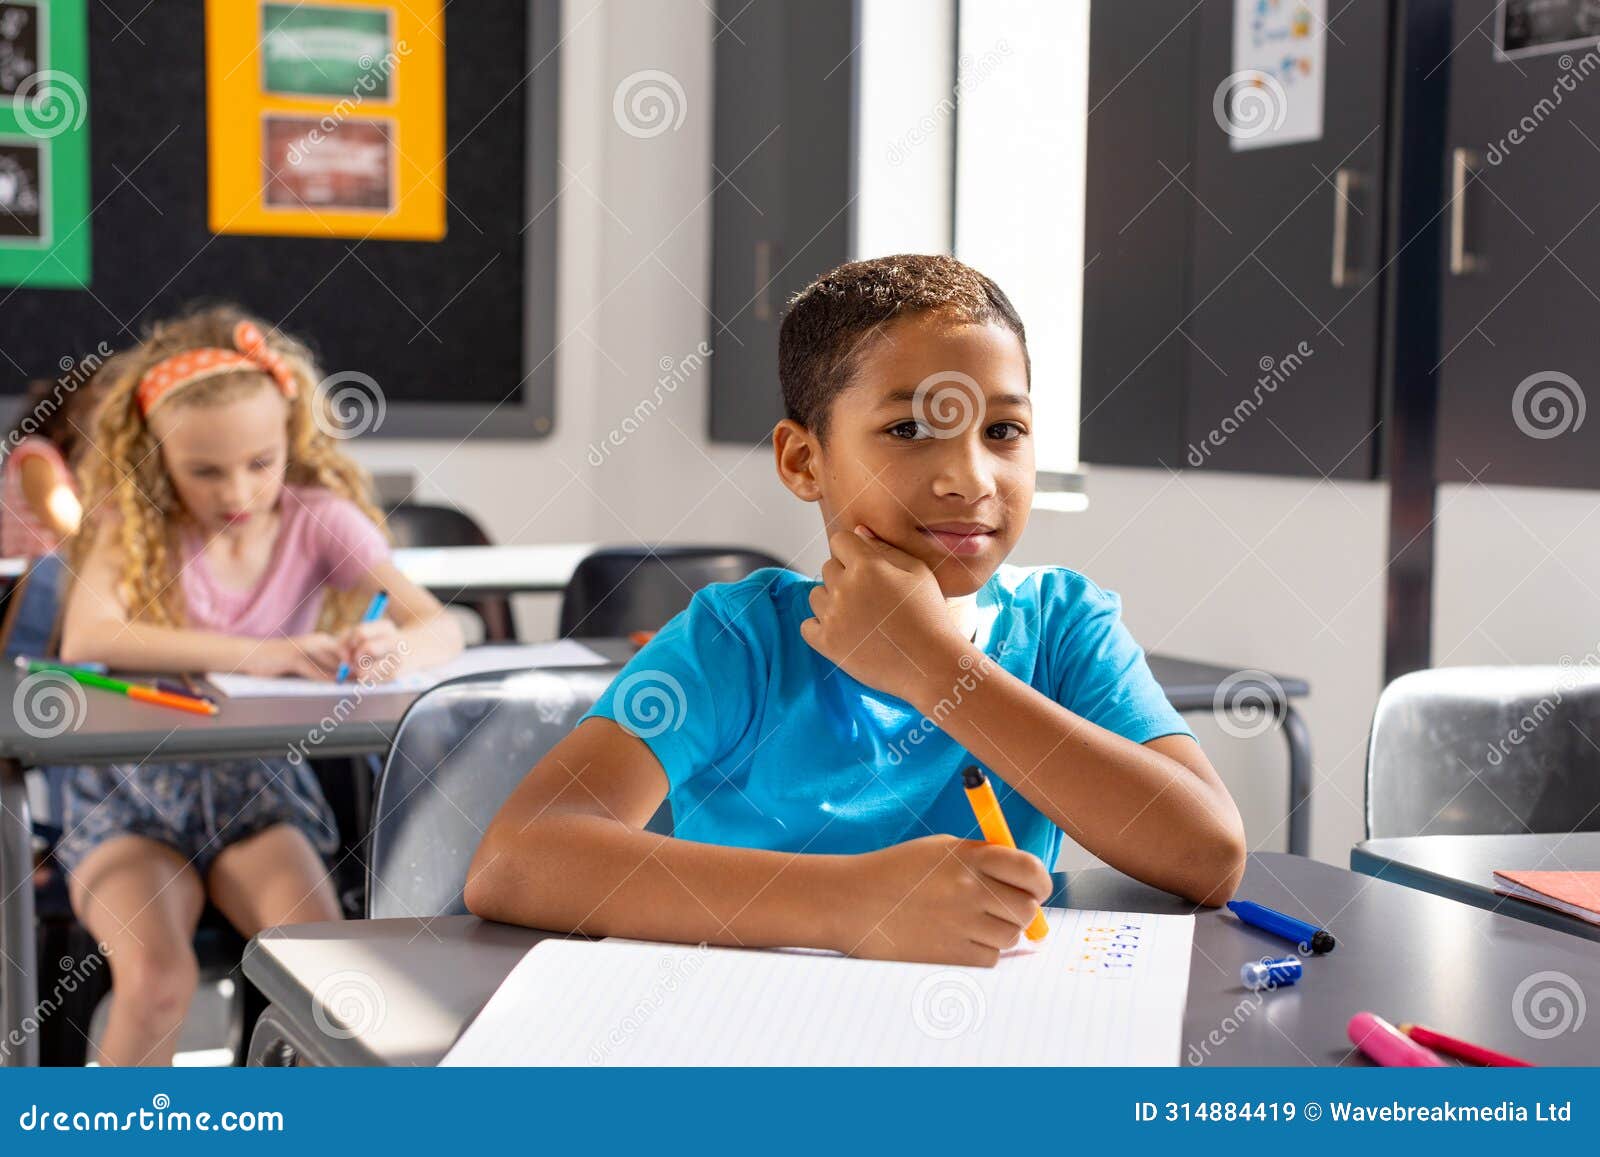 in school, young biracial male student sitting at a desk in a classroom, looking thoughtful